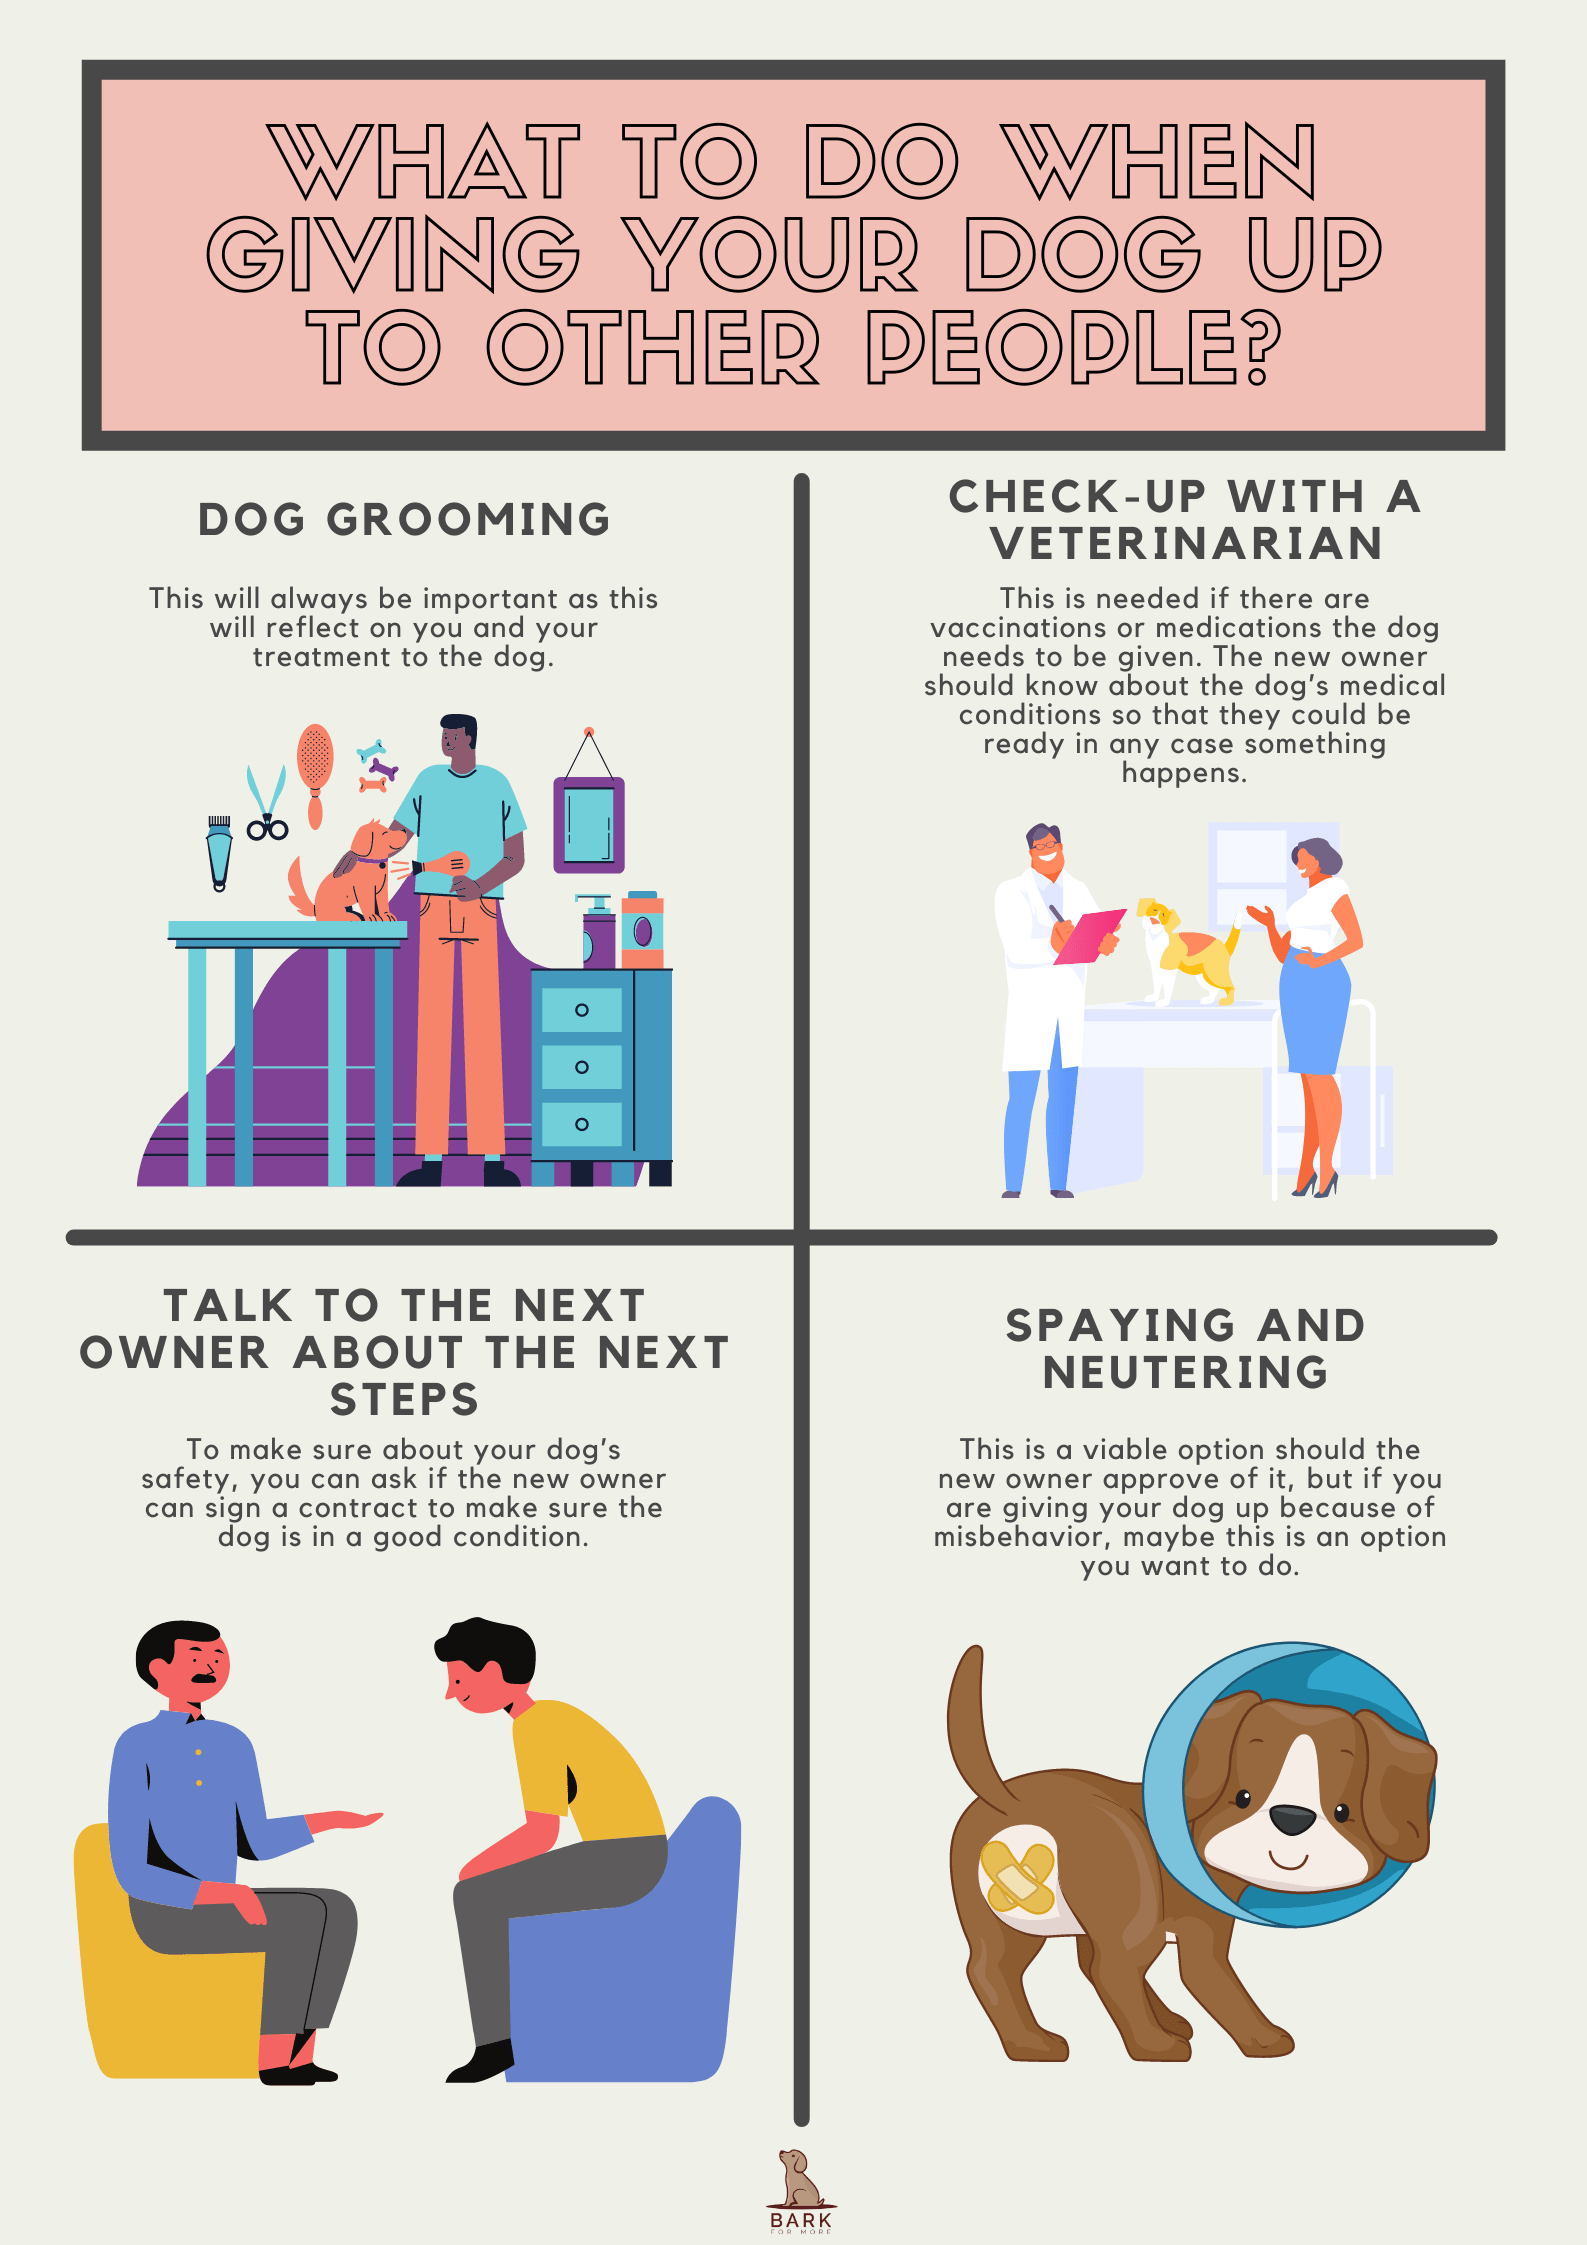 What to do when giving your dog up to other people